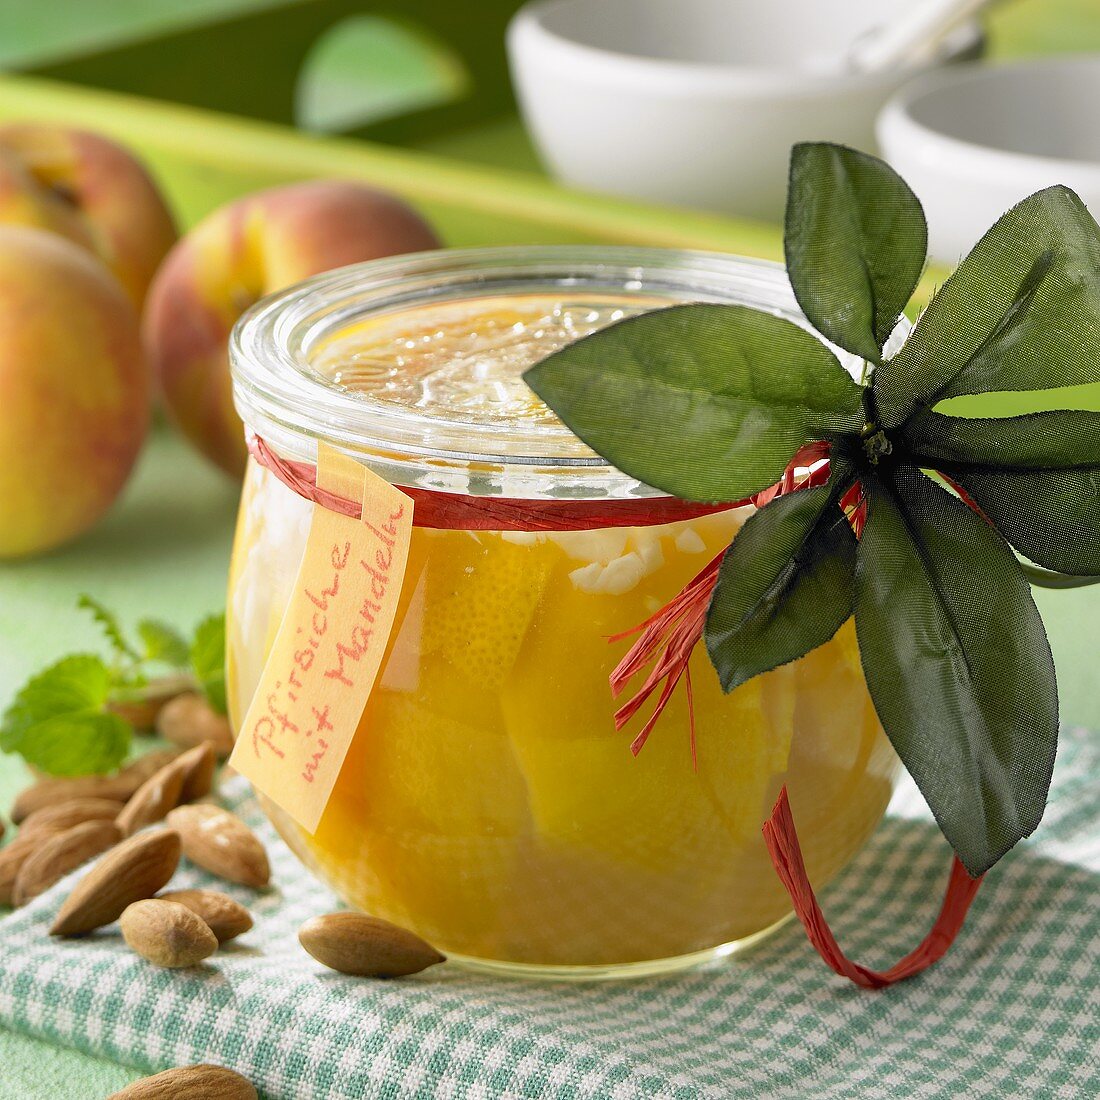 Bottled peaches with almonds